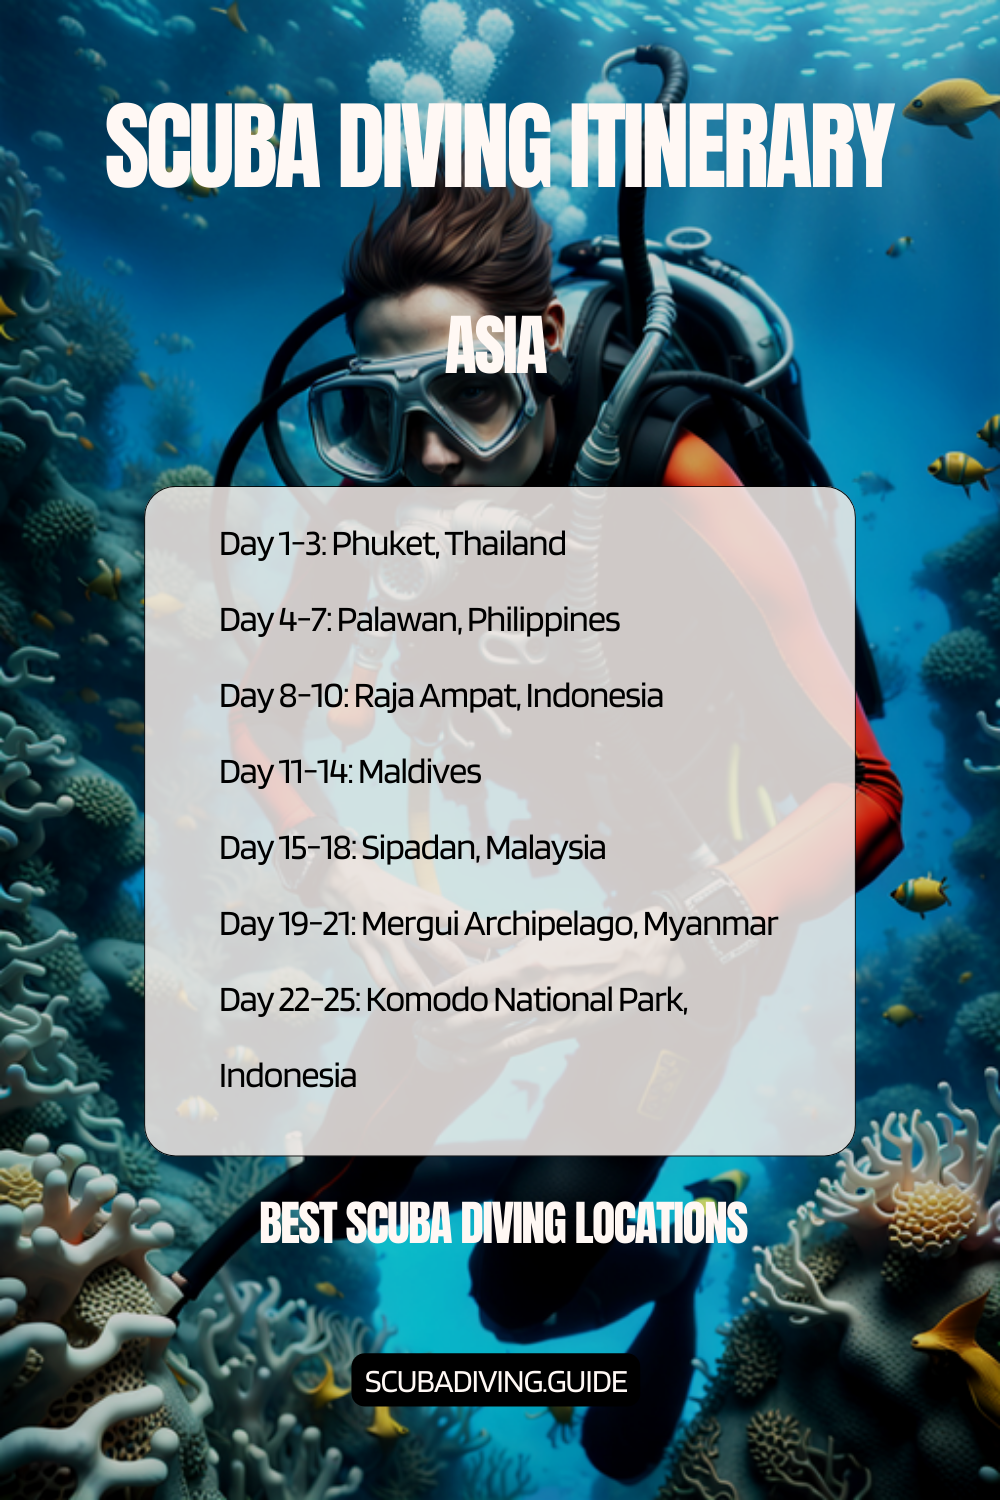 Asia Recommended Scuba Diving Itinerary